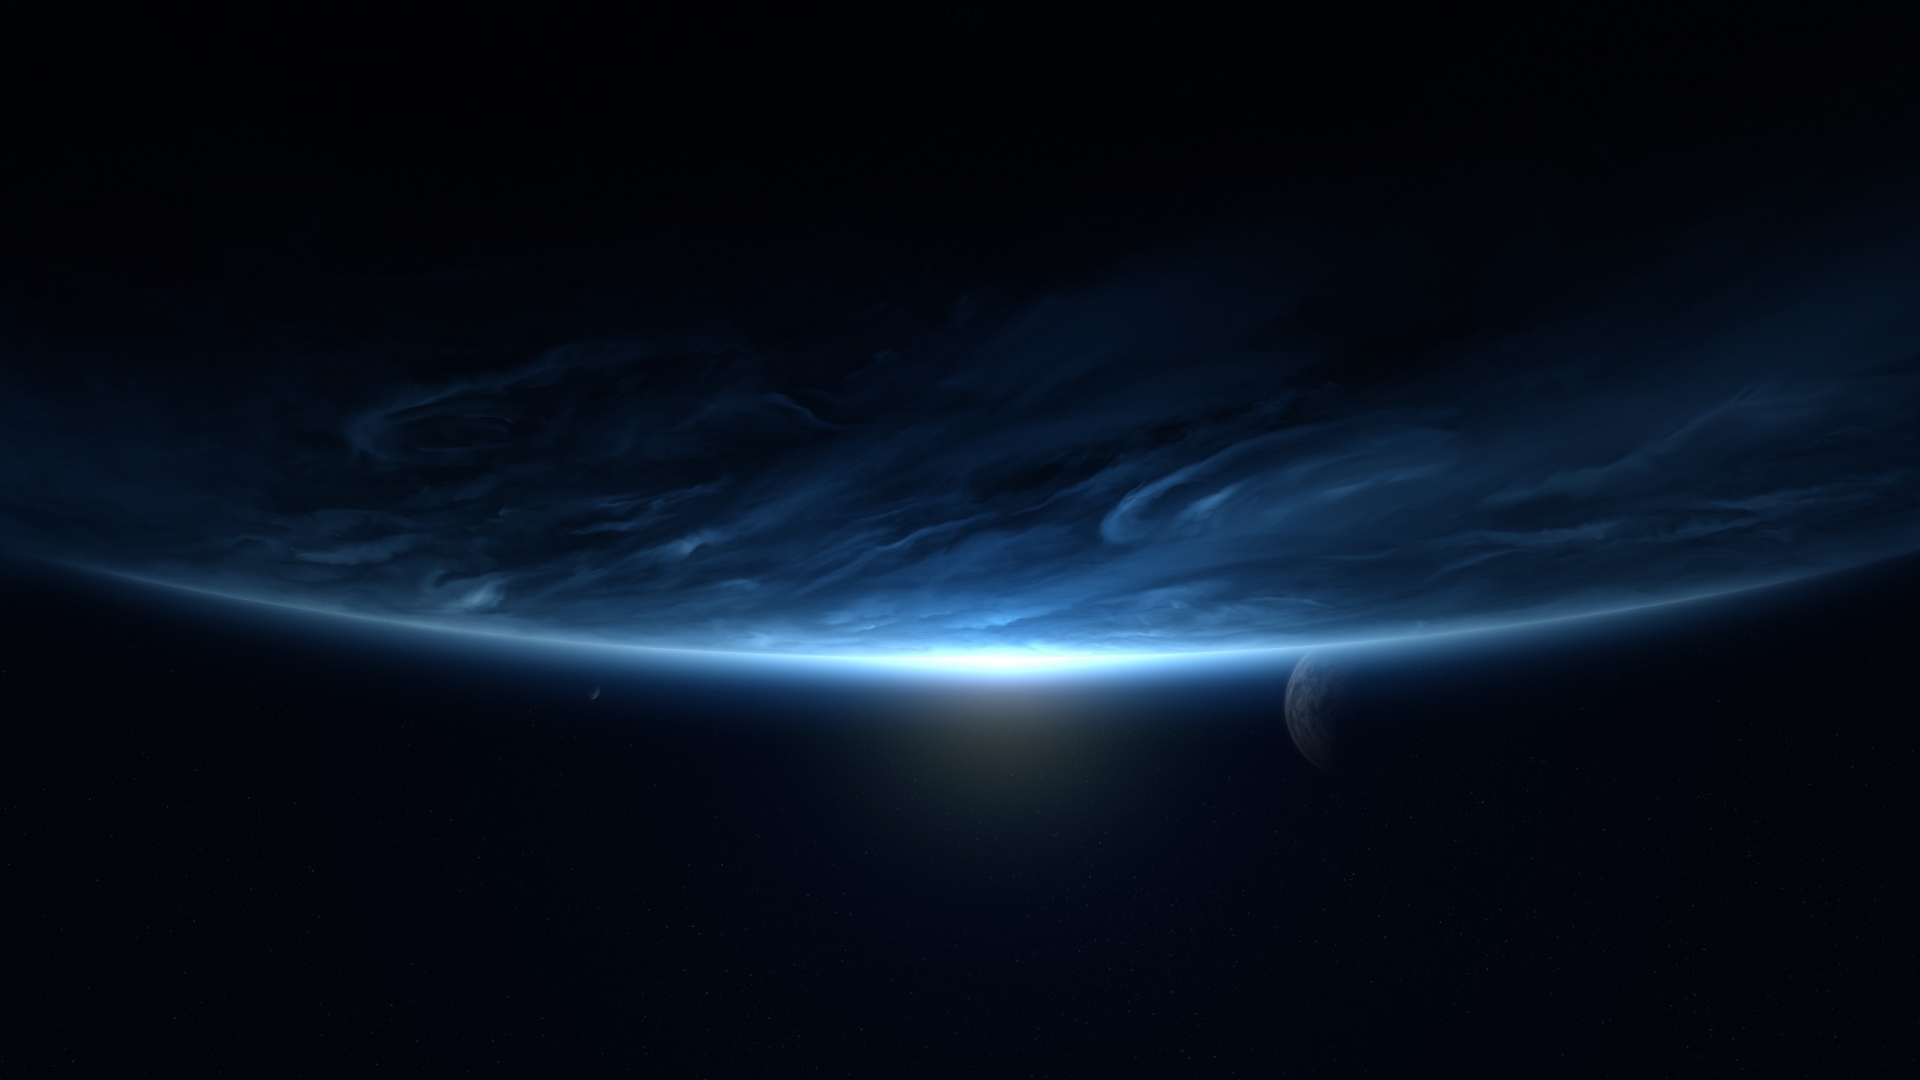 Light Under the Planet for 1920 x 1080 HDTV 1080p resolution